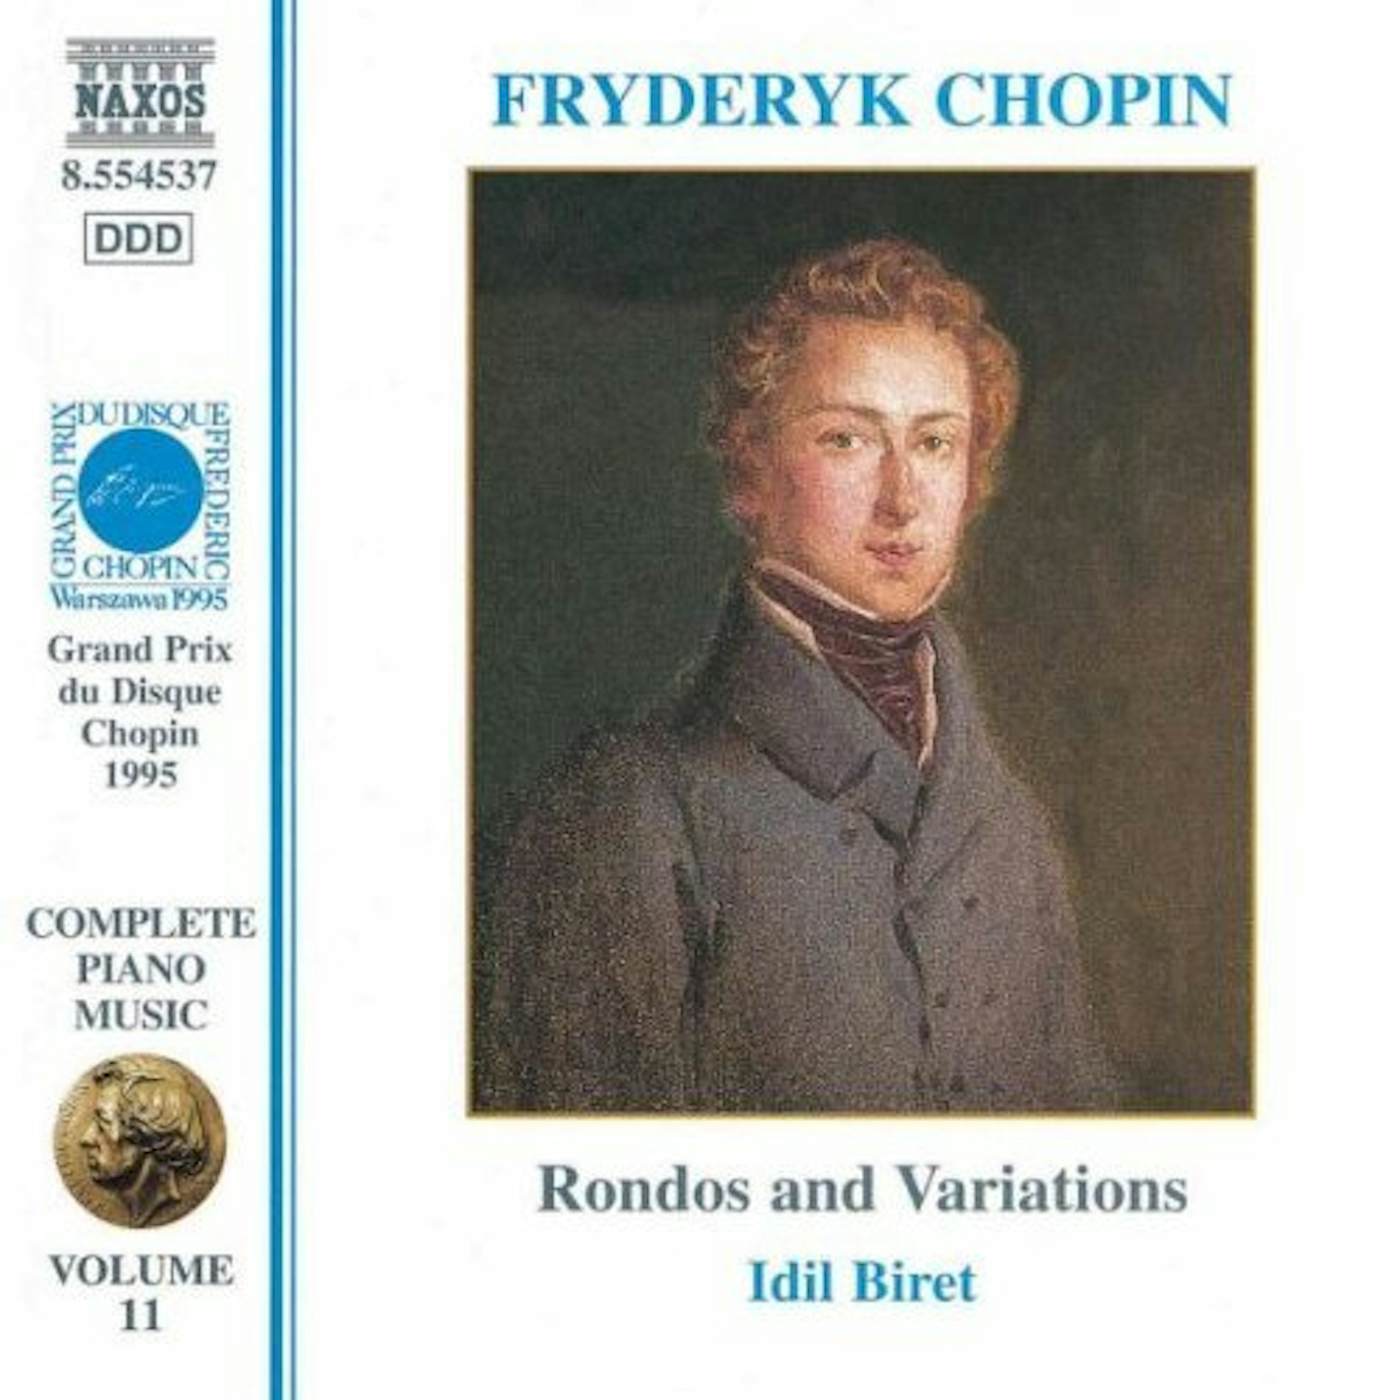 Frédéric Chopin COMPLETE PIANO MUSIC 11 CD